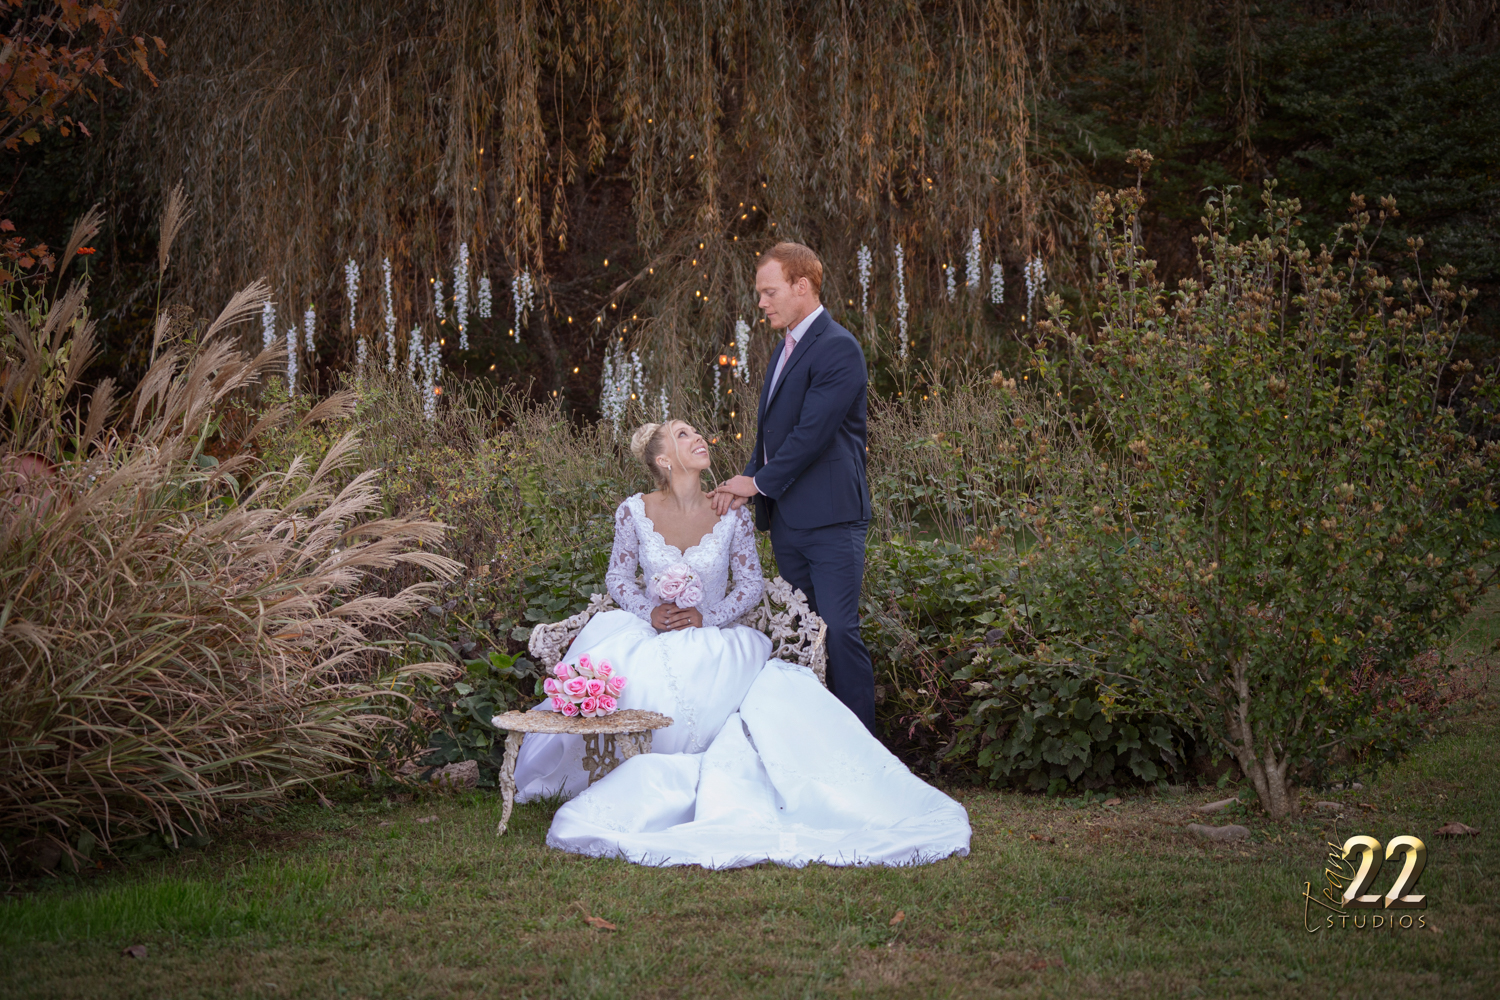 Bride seated looking up at her groom near a willow tree in the fall